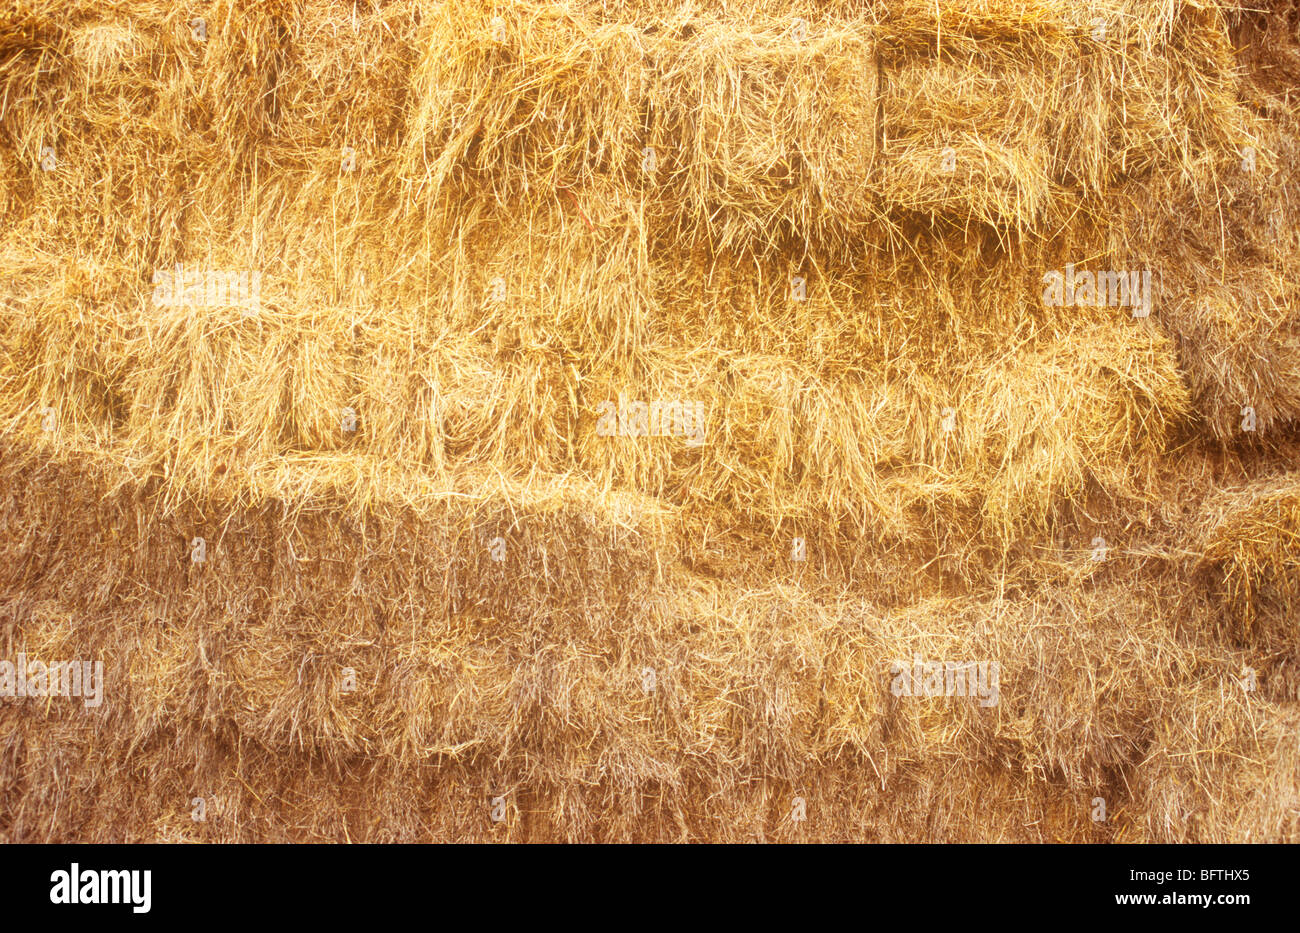 Detail of rectangular bales of golden hay stacked within a barn Stock Photo